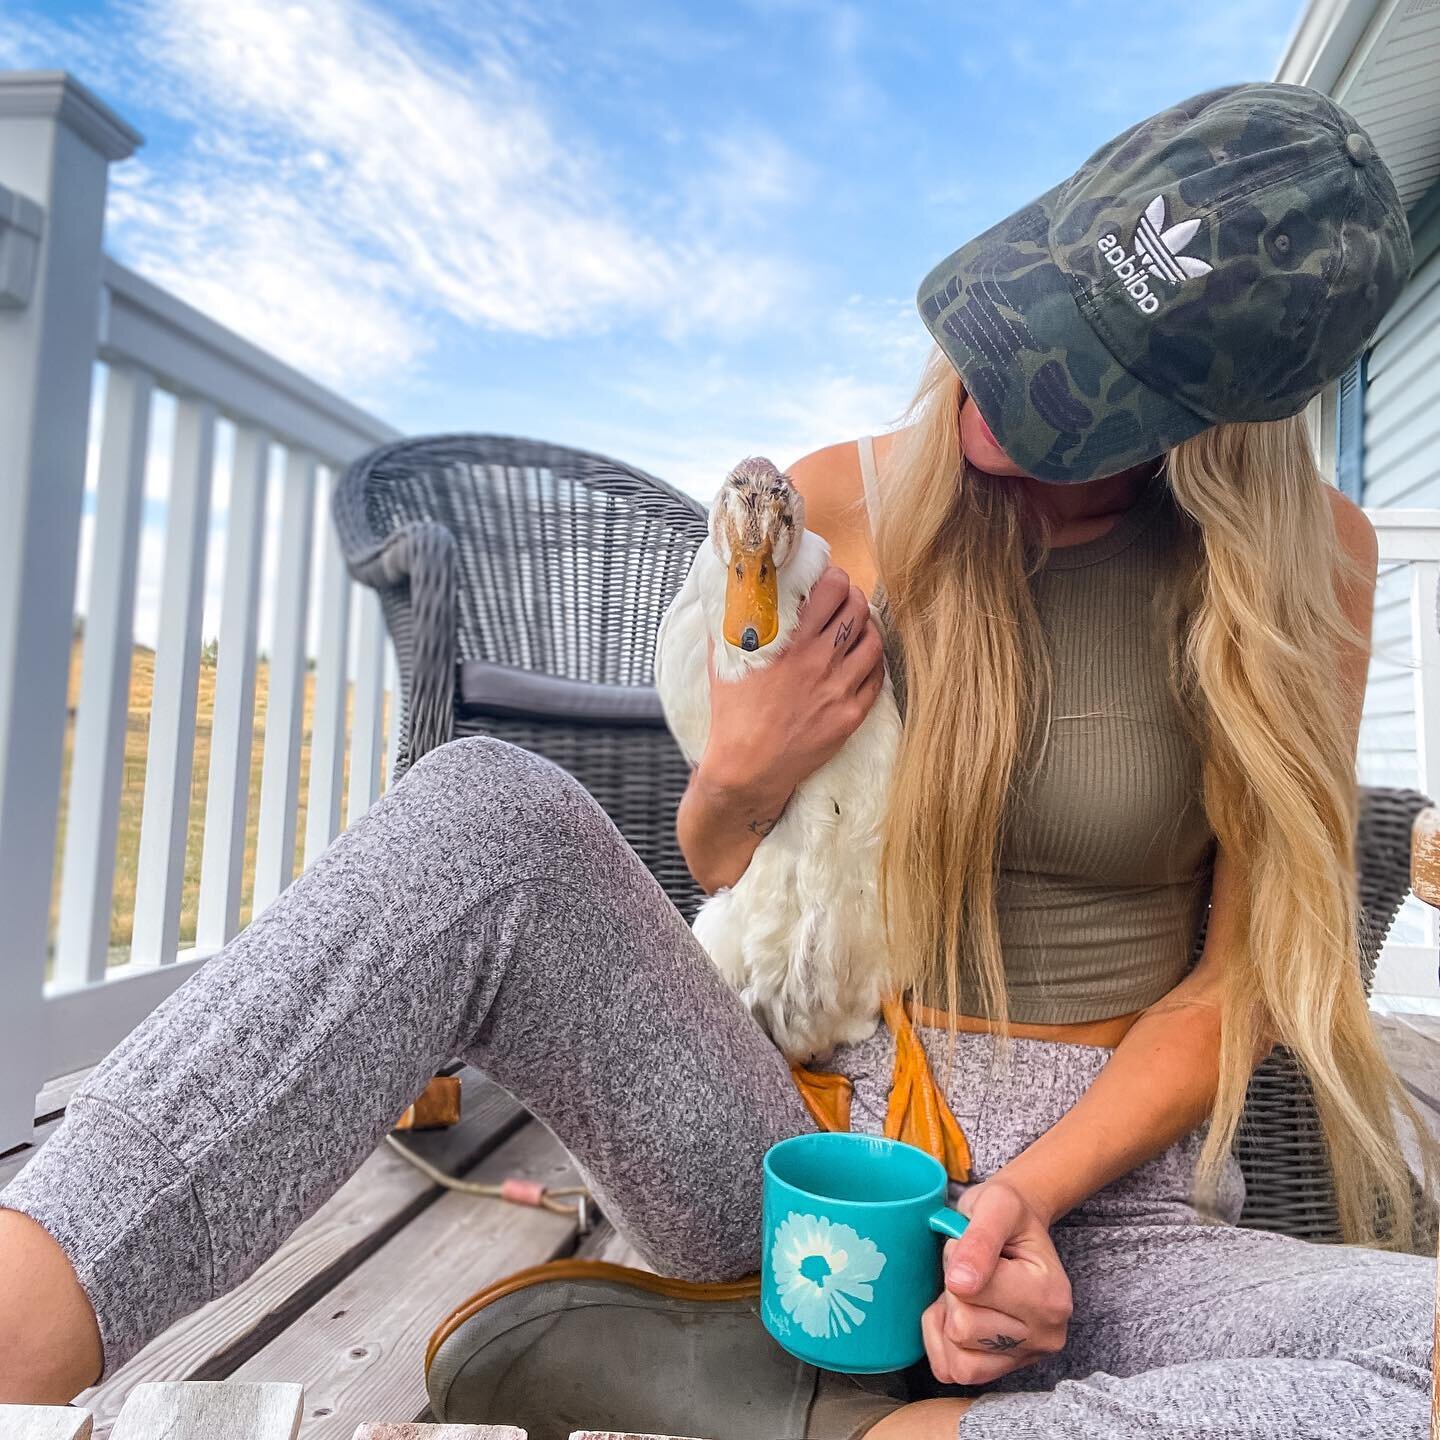 i don&rsquo;t know about you, but lately i&rsquo;ve been enjoying my coffee with 🍯 🥰

#honeytheoneeyedduck